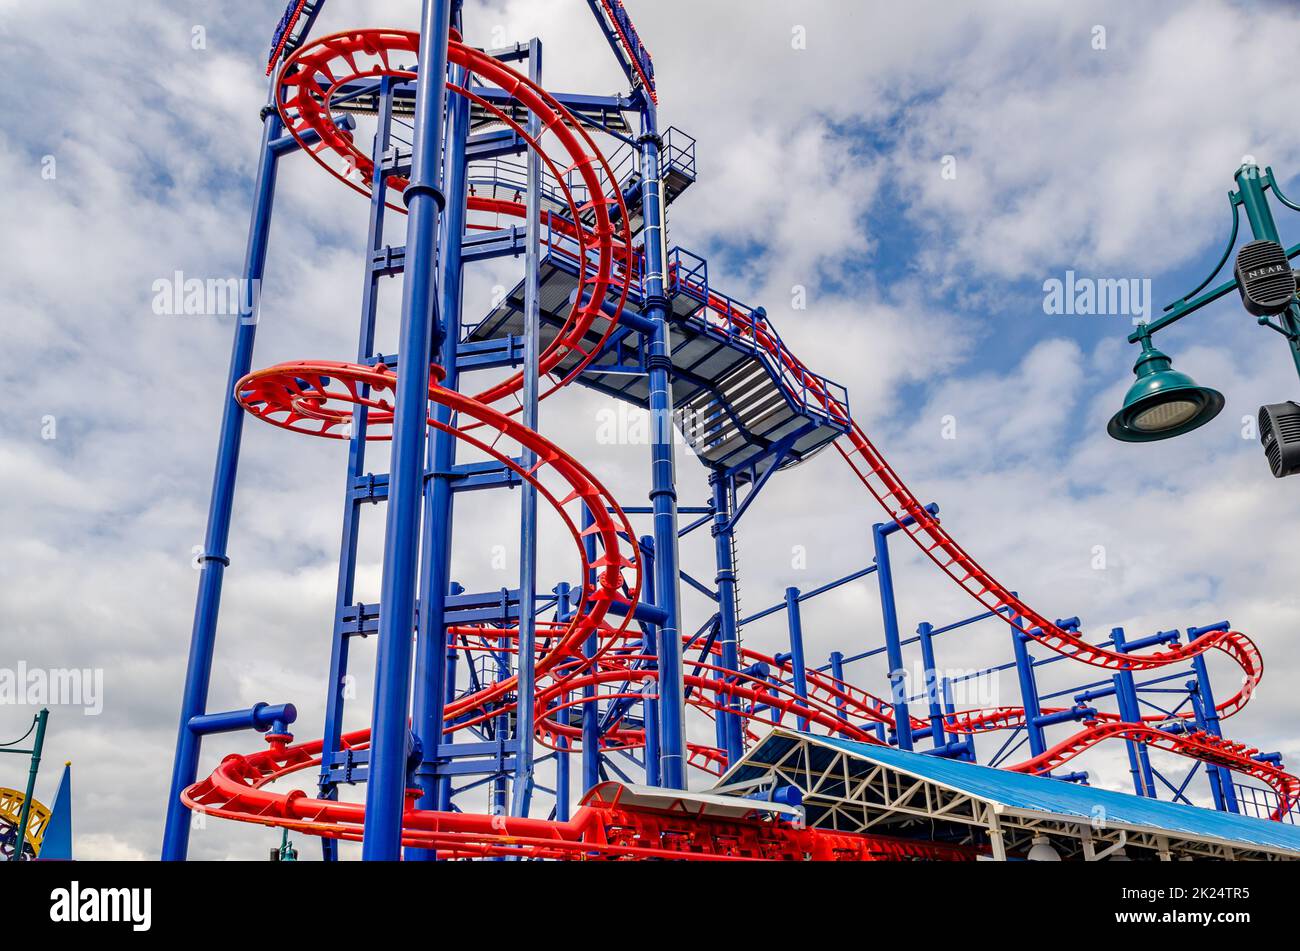 Soarin' Eagle Red Rollercoaster at Coney island, Brooklyn, New York City during winter day with cloudy sky, view from low angle, horizontal Stock Photo